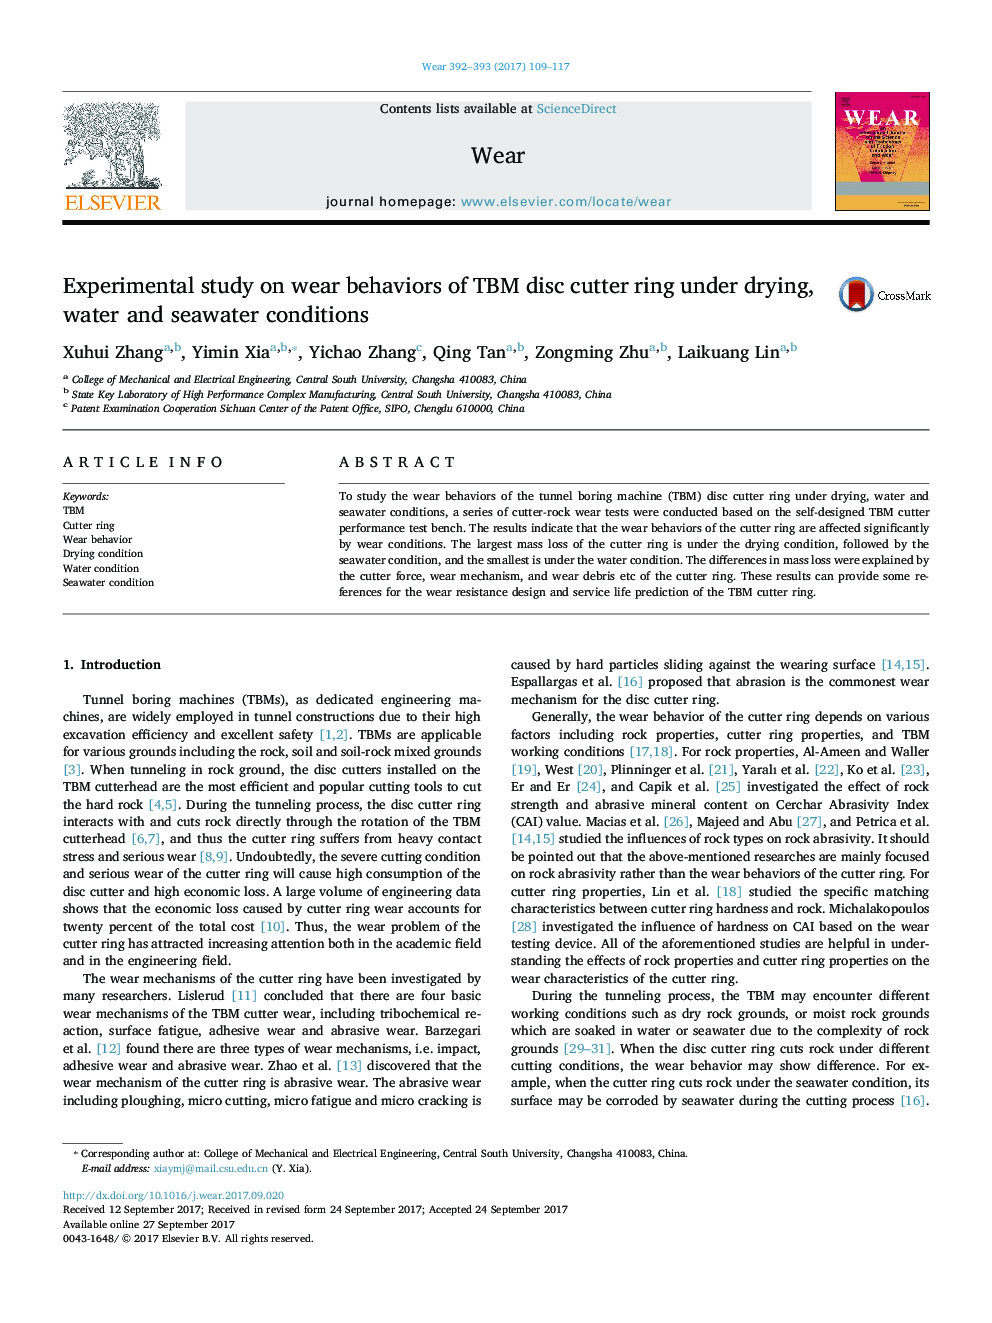 Experimental study on wear behaviors of TBM disc cutter ring under drying, water and seawater conditions